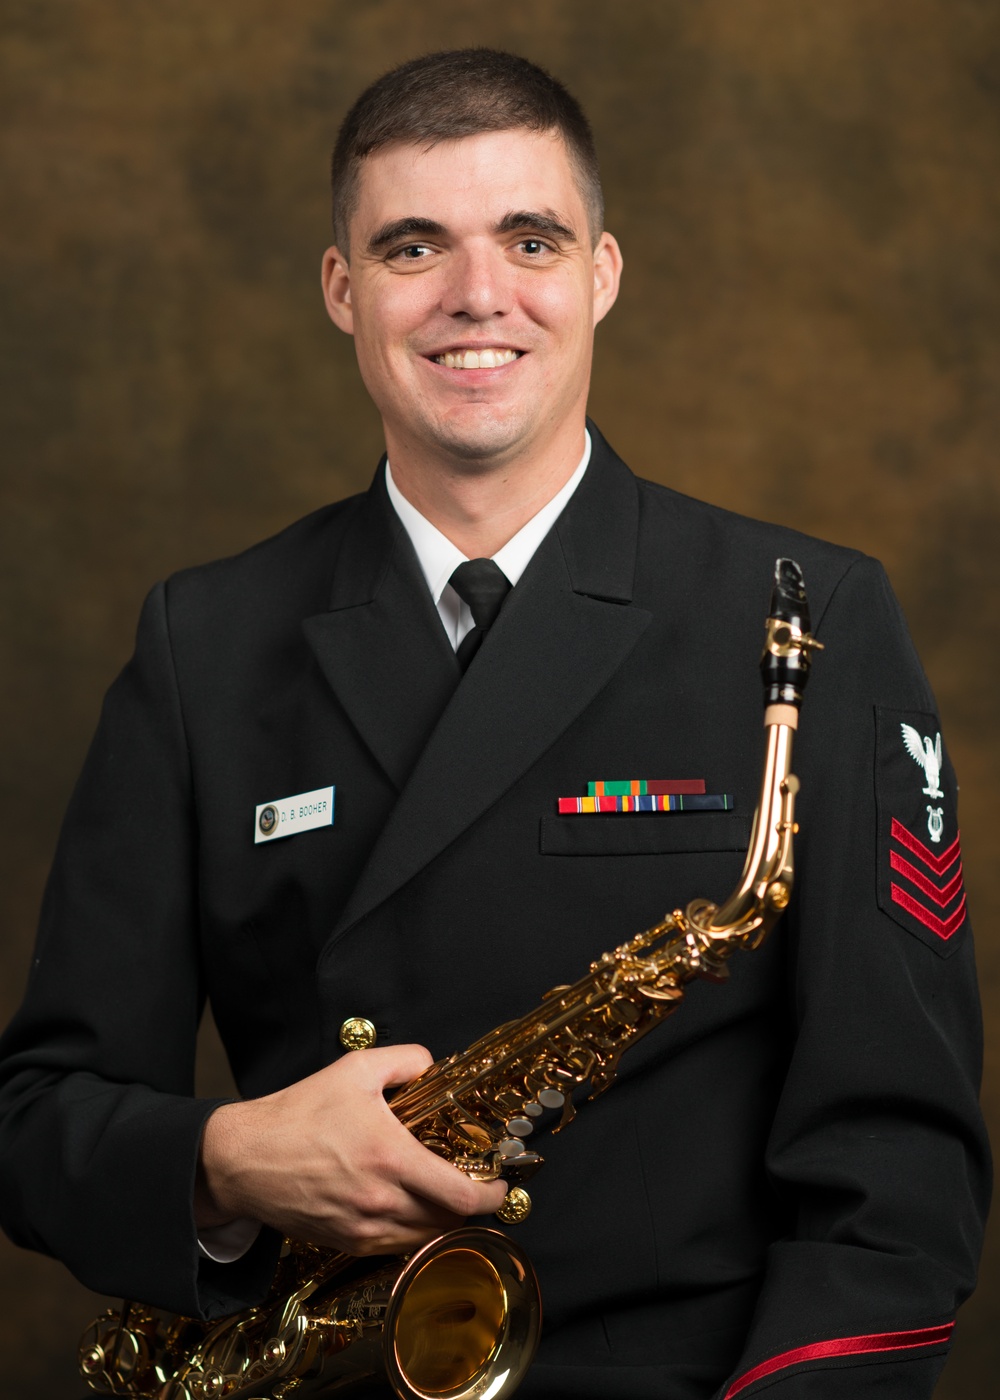 U.S. Navy Petty Officer 1st Class Booher supports the 58th Presidential Inauguration